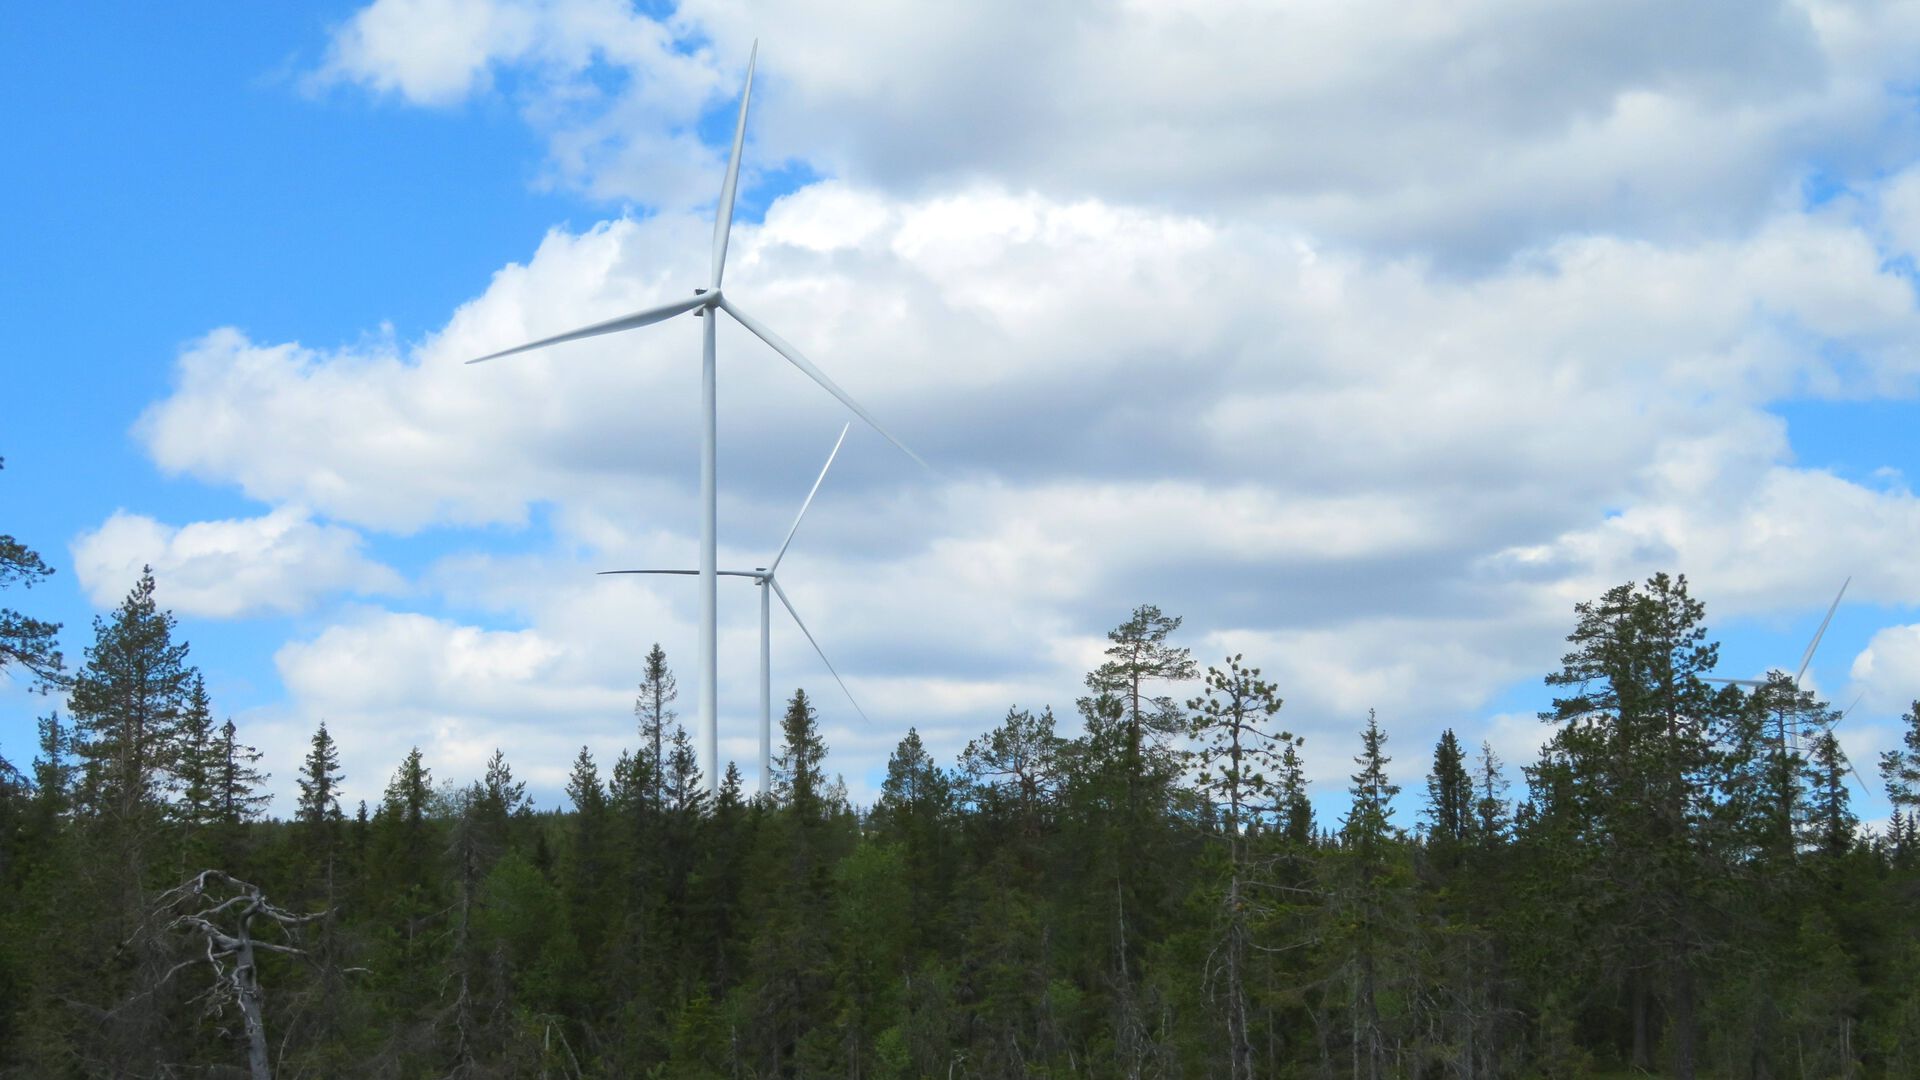 Two windmills stretch up from a forest of coniferous trees. Blue sky with white clouds.